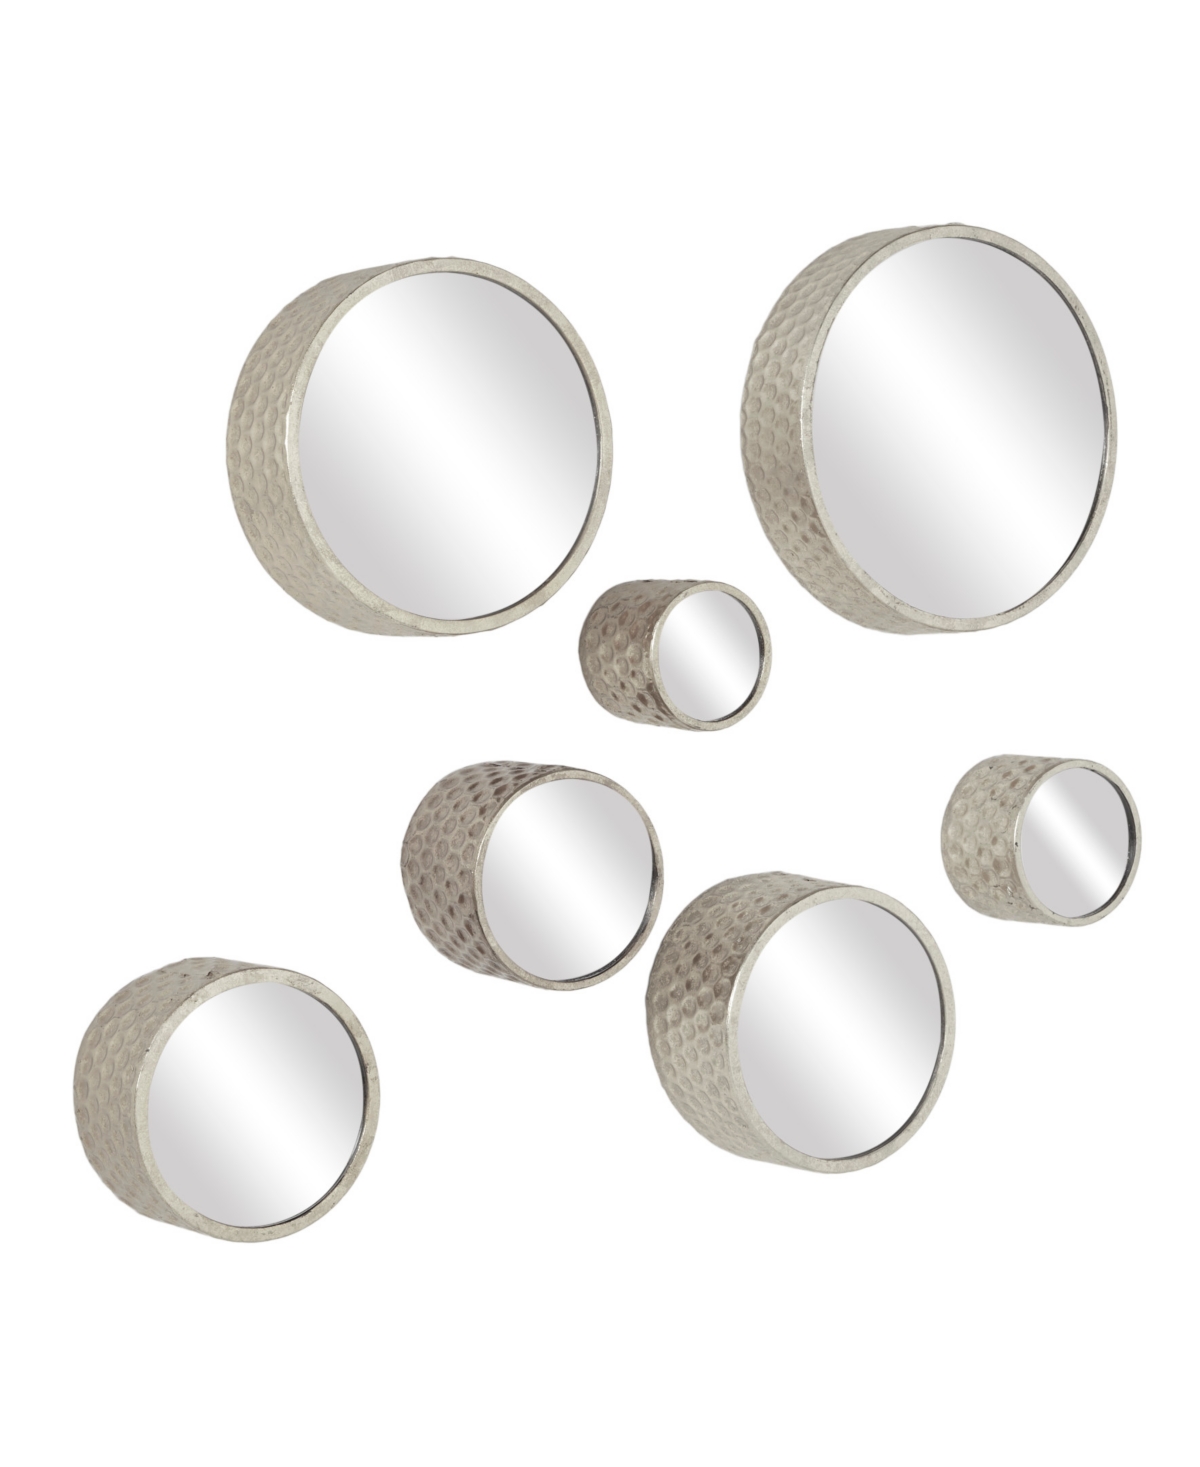 CosmopolitanLiving, Round Hammered Metal Decorative Wall Mirrors, Set of 7 - Silver-tone